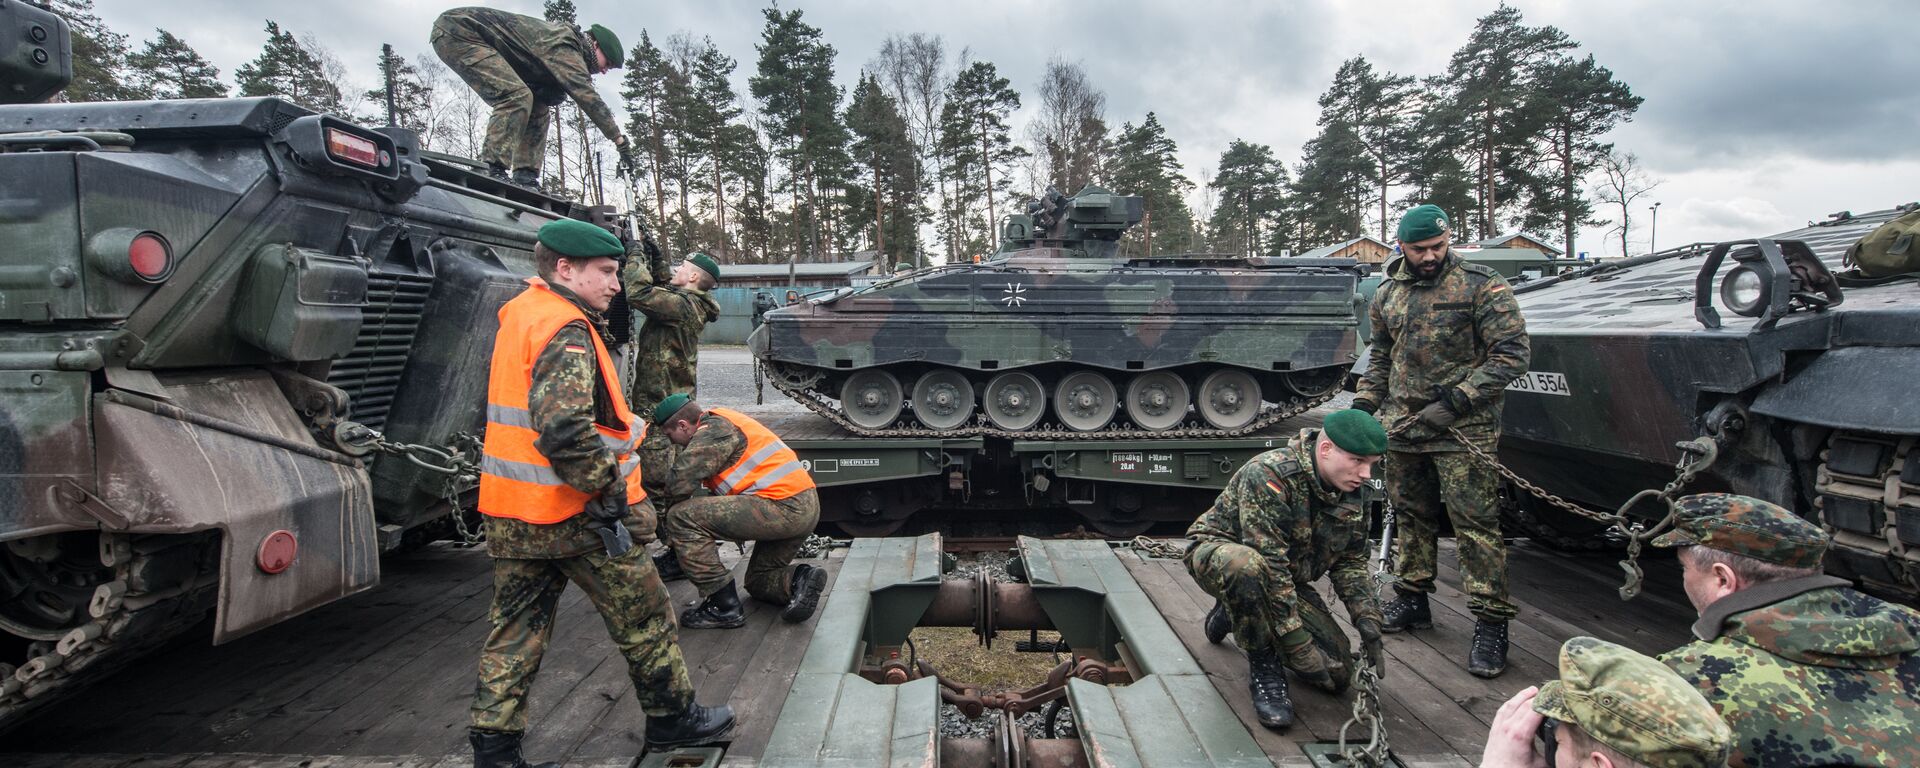 German soldiers load armored vehicles of the type Marder on a train at the troop exercise area in Grafenwoehr, southern Germany, on February 21, 2017 - Sputnik International, 1920, 24.04.2022